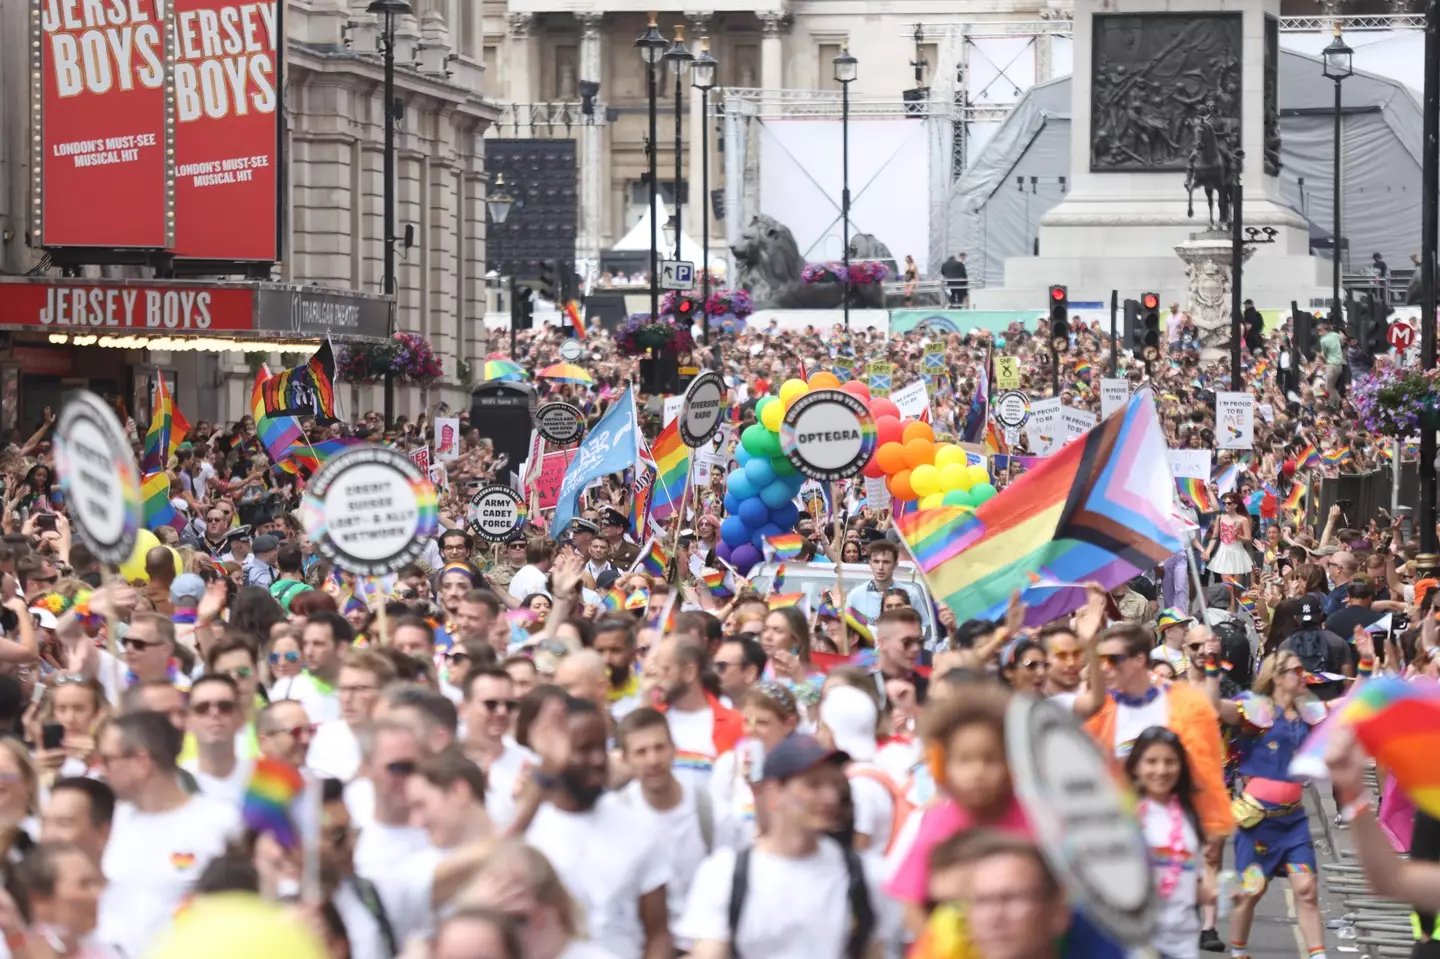 More than a million people were expected to have turned up to the first London Pride festival in London since the pandemic.